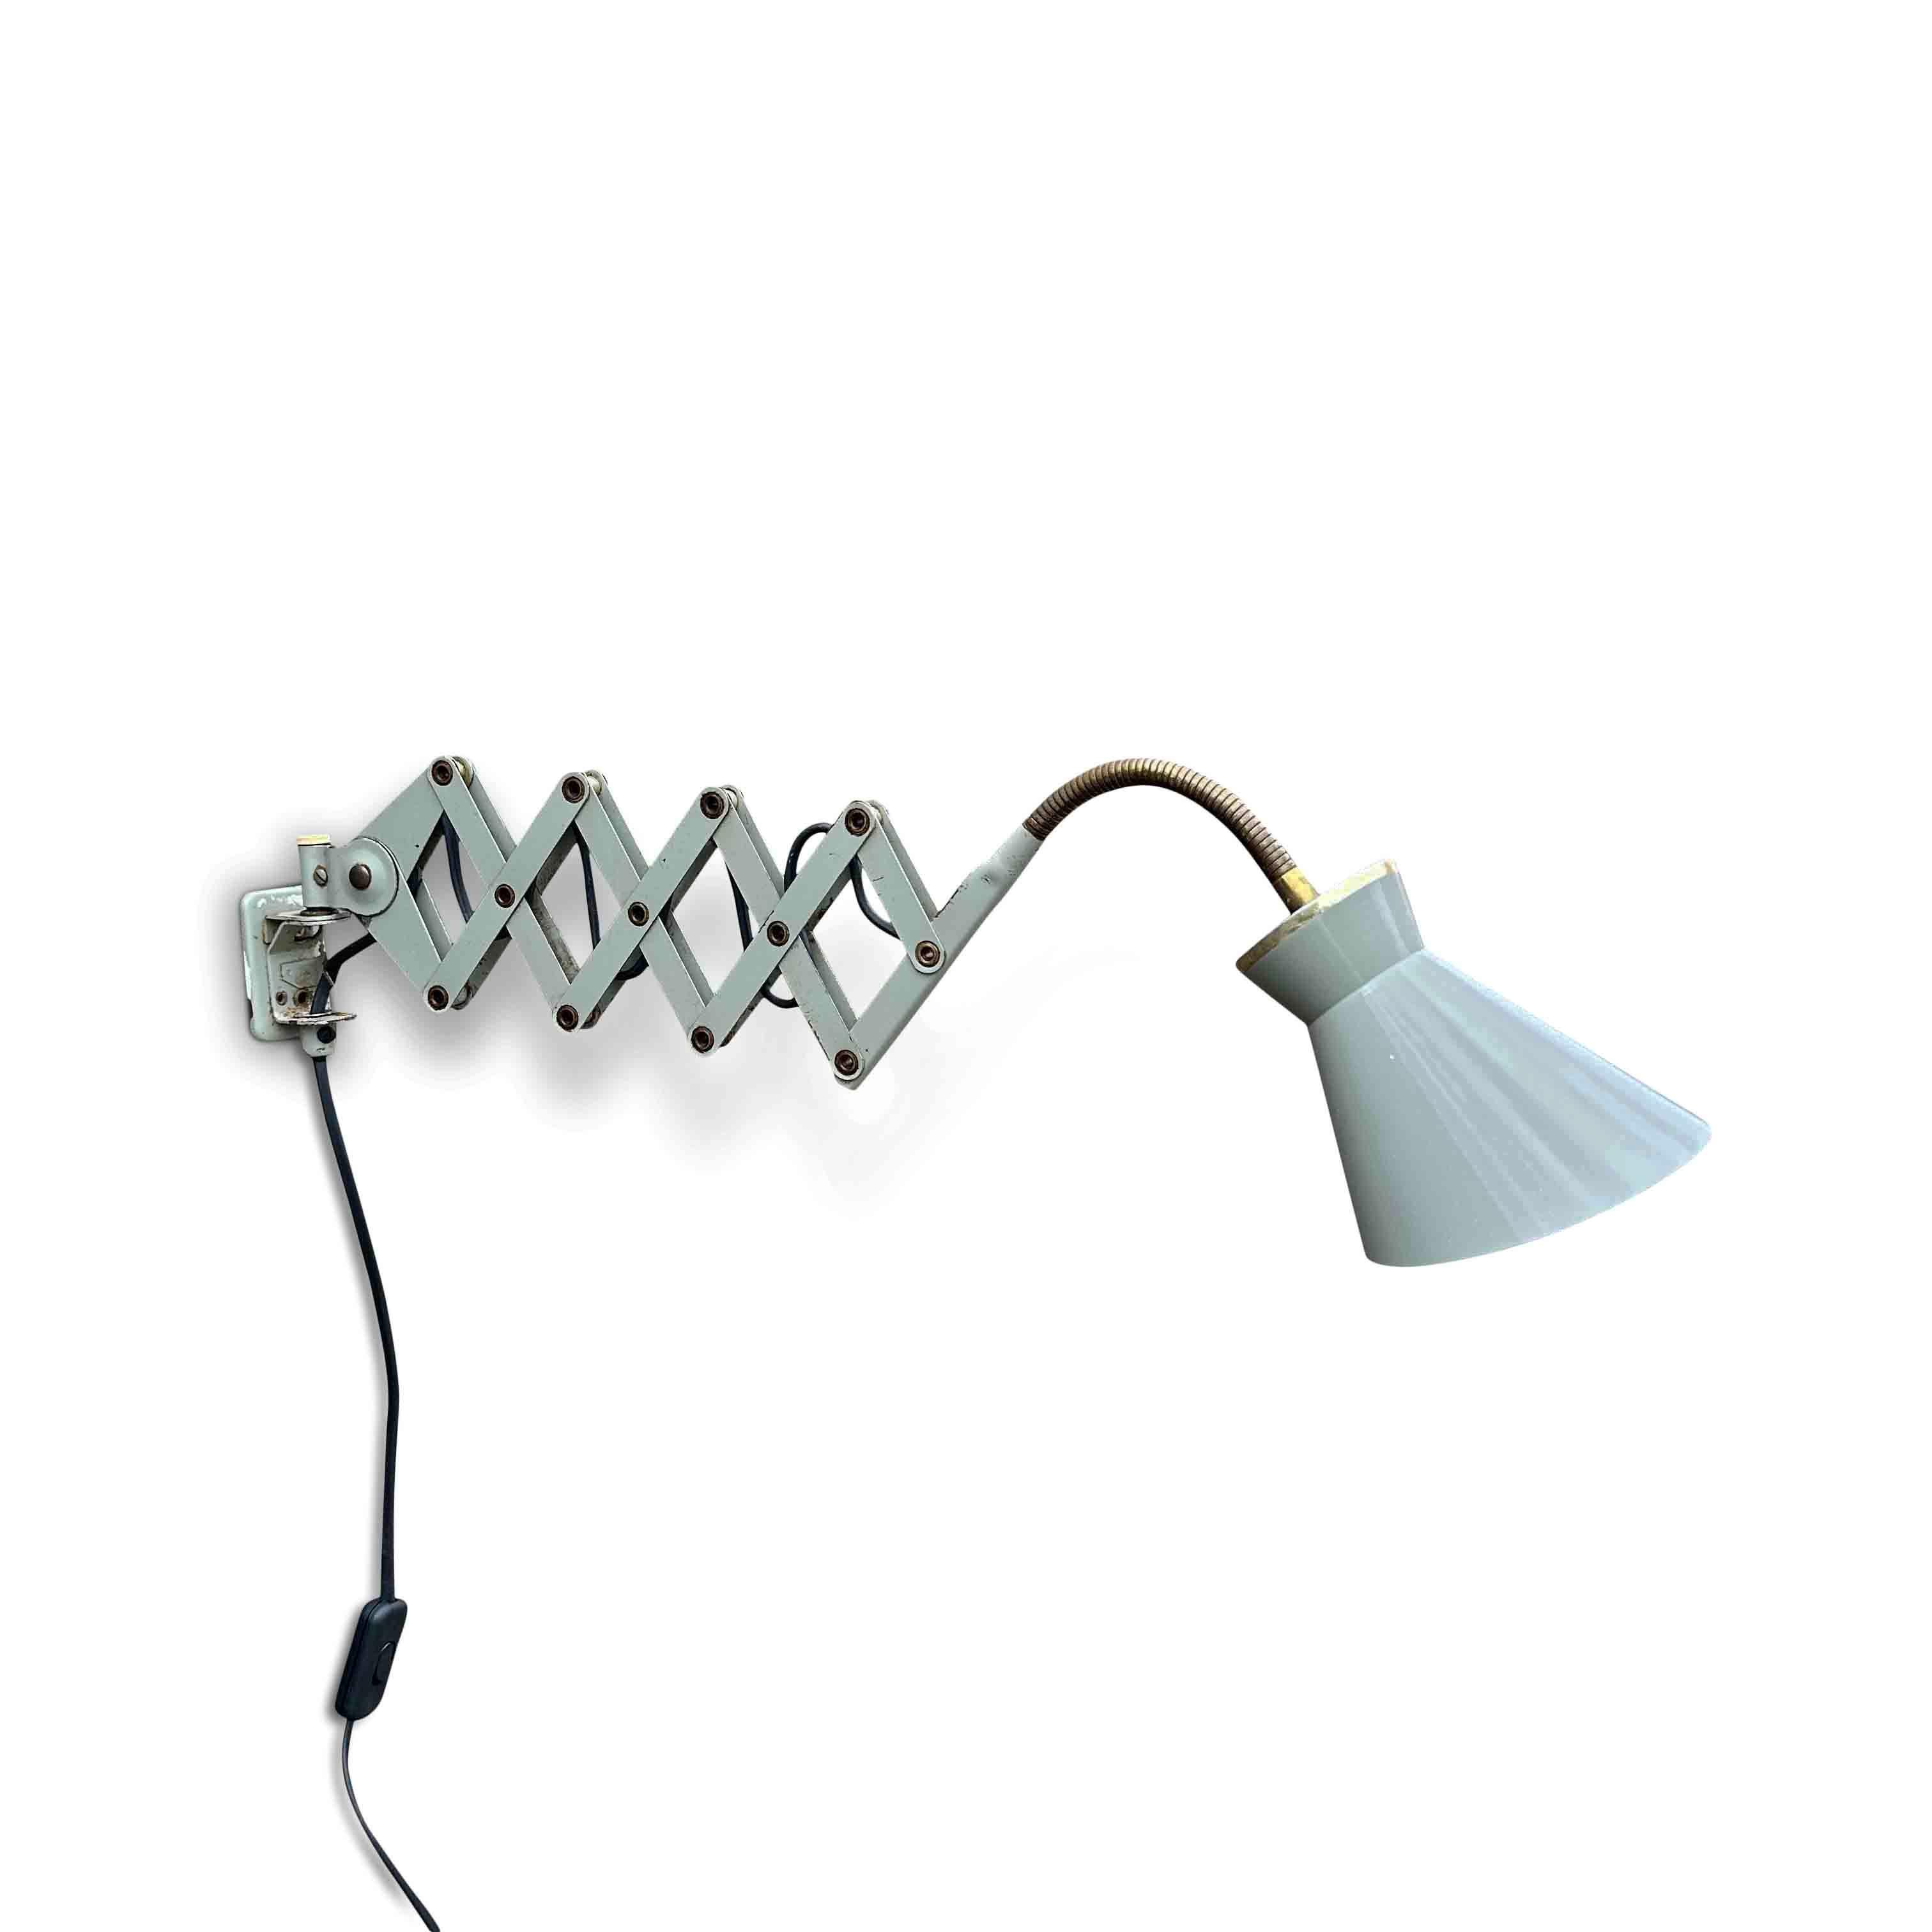 This beautiful and rare wall fixture 'Model 105' was designed by Karl Lang and produced by the renowned SIS Leuchten. This gray wall lamp has the typical features of the 1950s: a brass gooseneck, a diabolo-shaped shade, and the scissor mechanism.